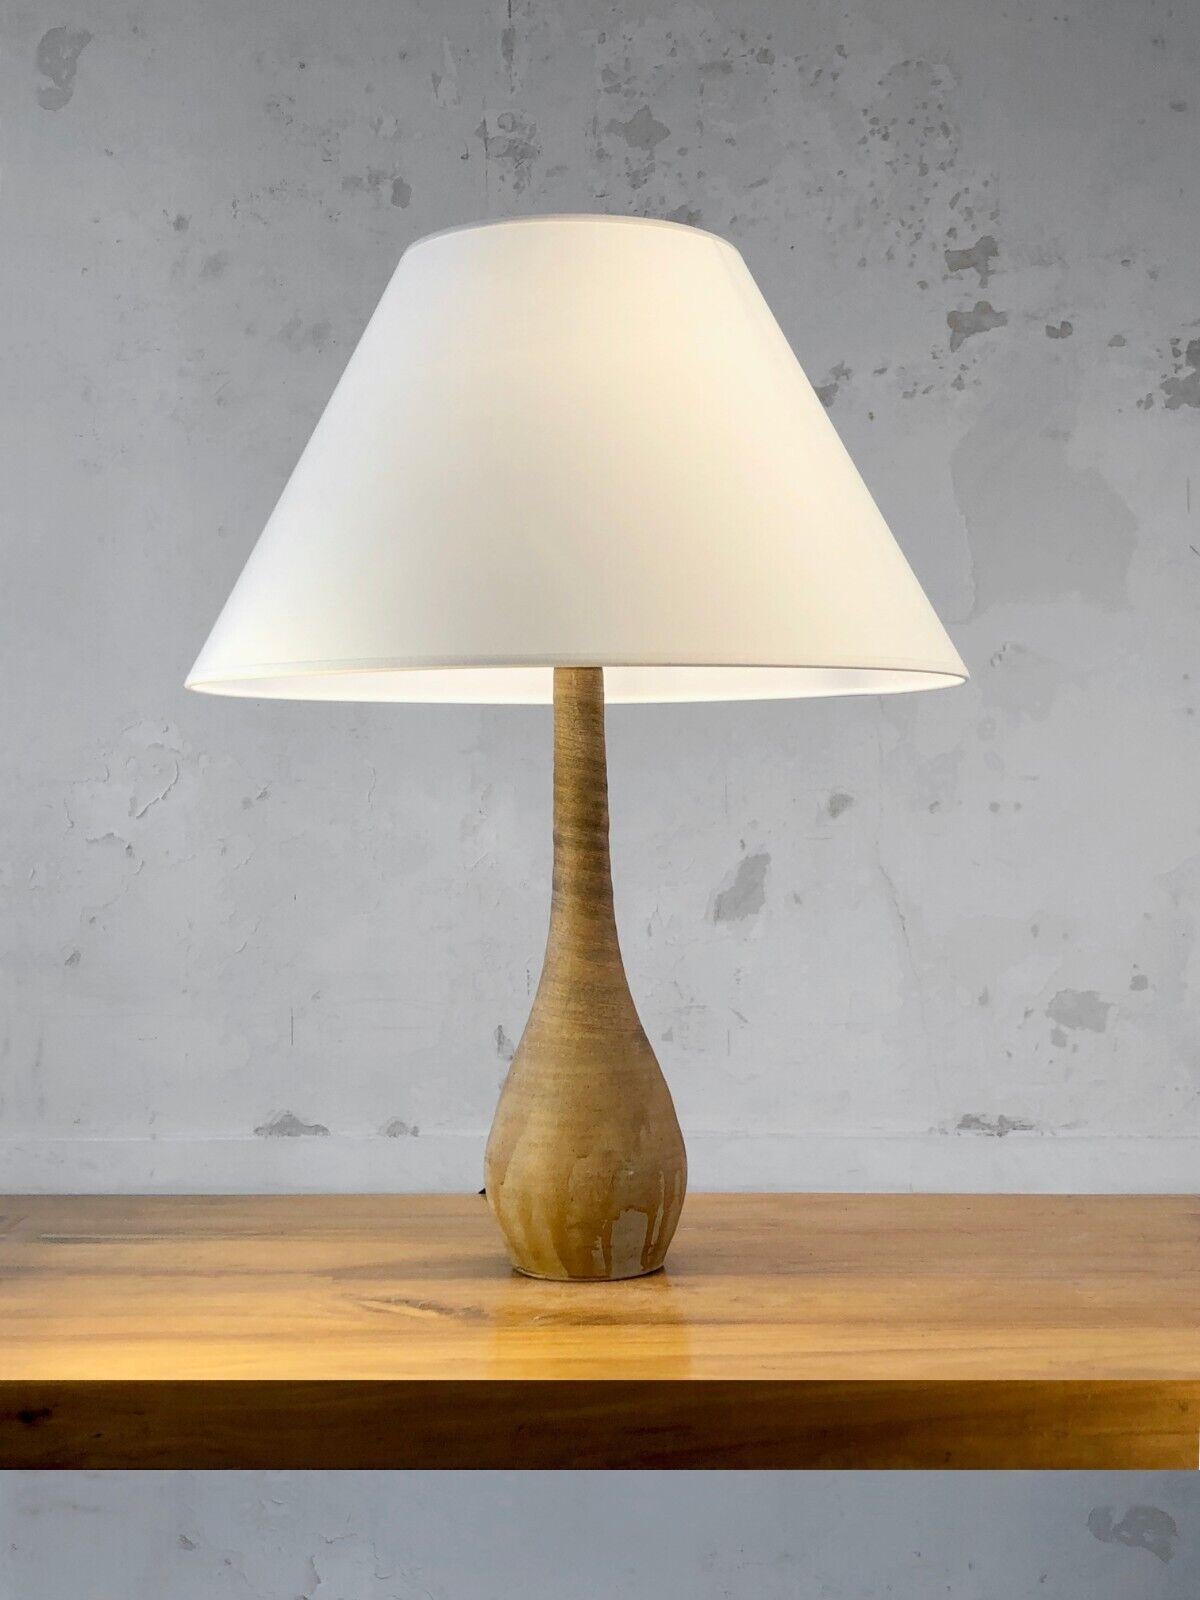 An elegant table lamp, Post-Modernist, Brutalist, Popular Art, Shabby-Chic, Rustic Modern, with a curved Forme-Libre body in very raw earthy sandstone with a twisted movement irregularly enameled with a few drips, to be attributed, La Borne, France